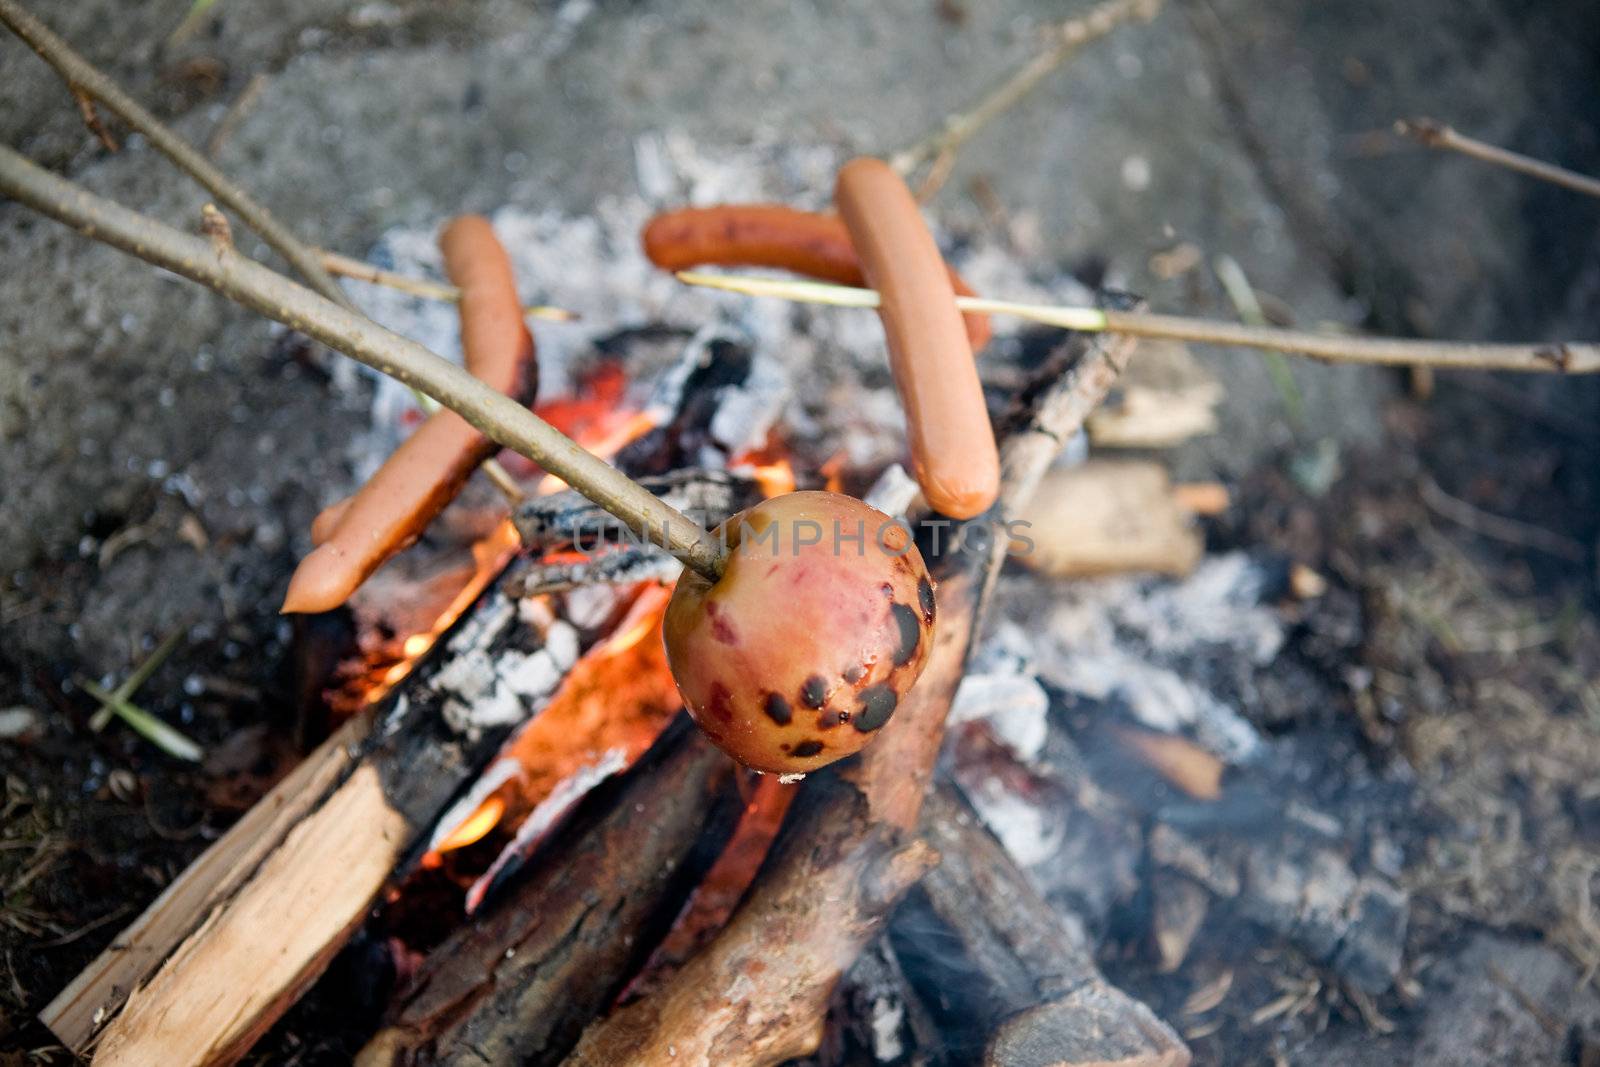 A vegetarian on a wiener roast - shallow depth of field with the focus on the apple.